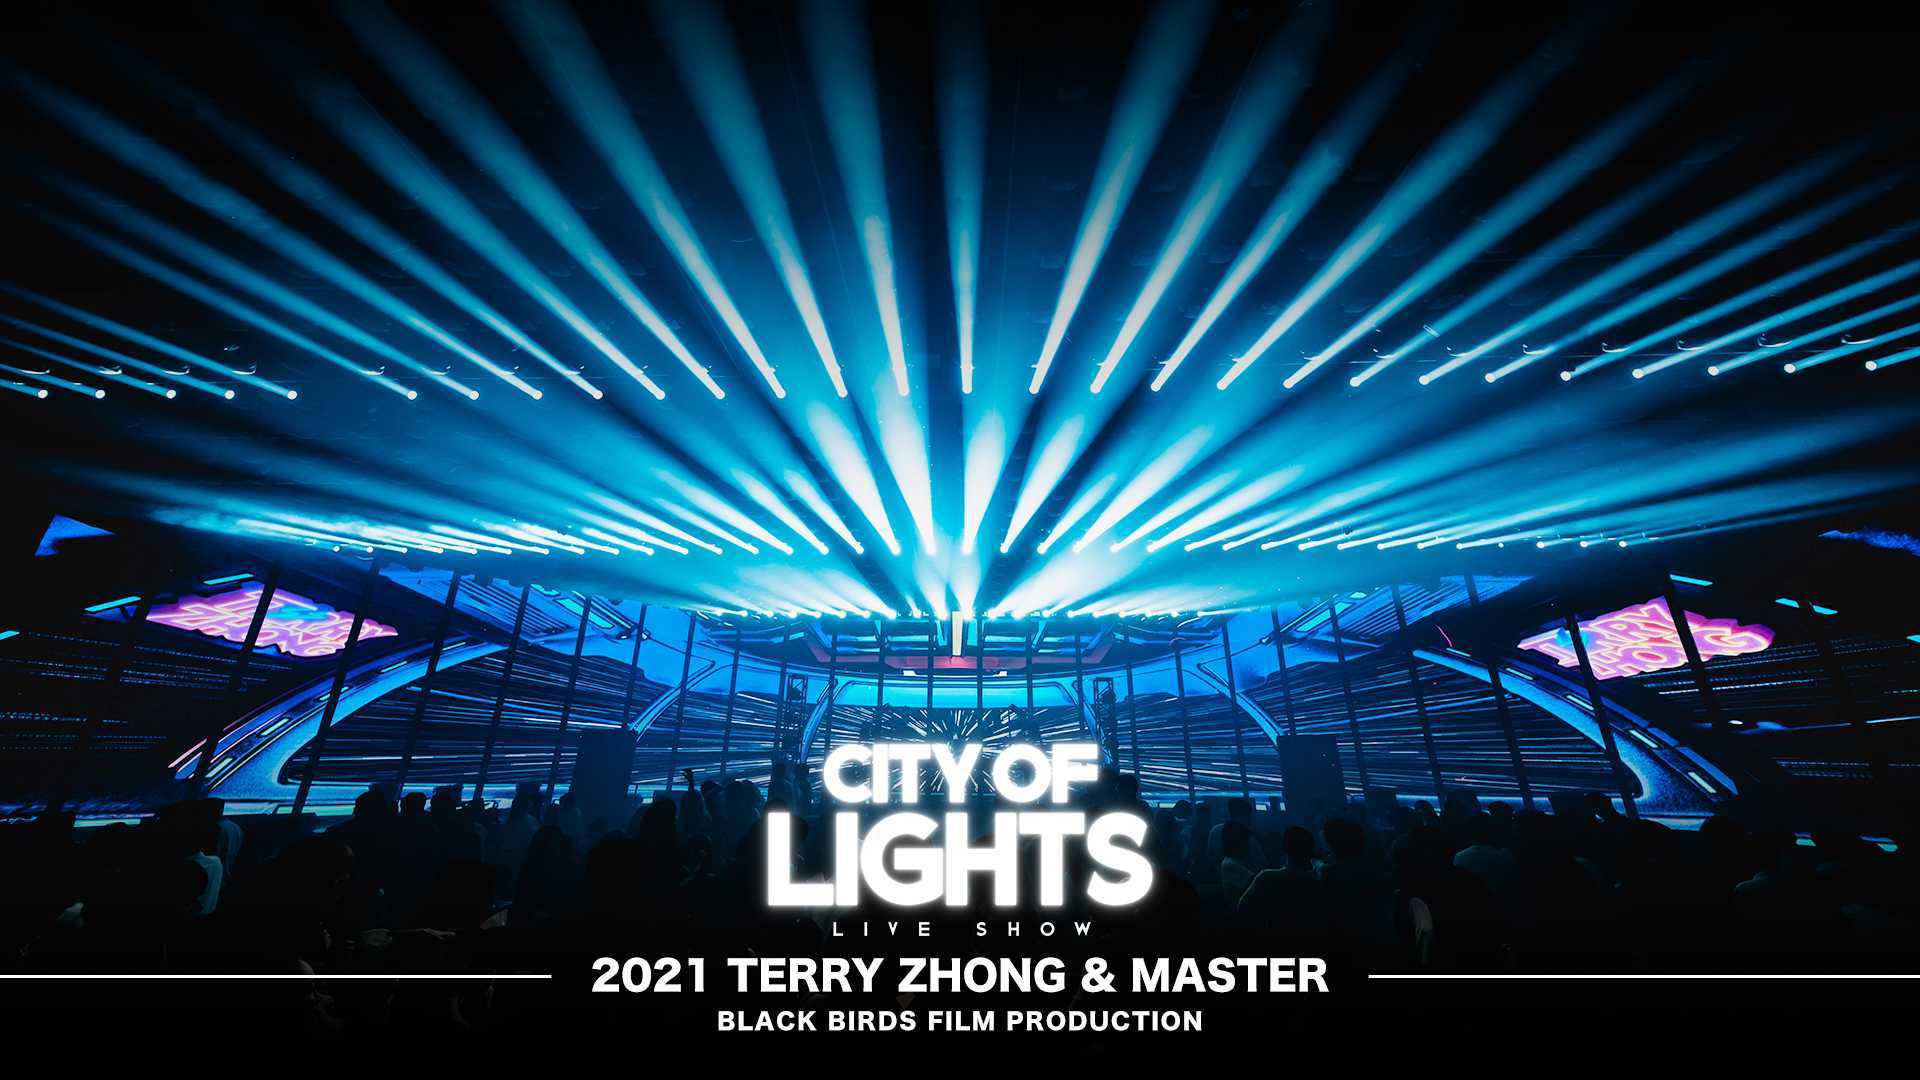 City of Lights/TerryZhong 2021 Live Show